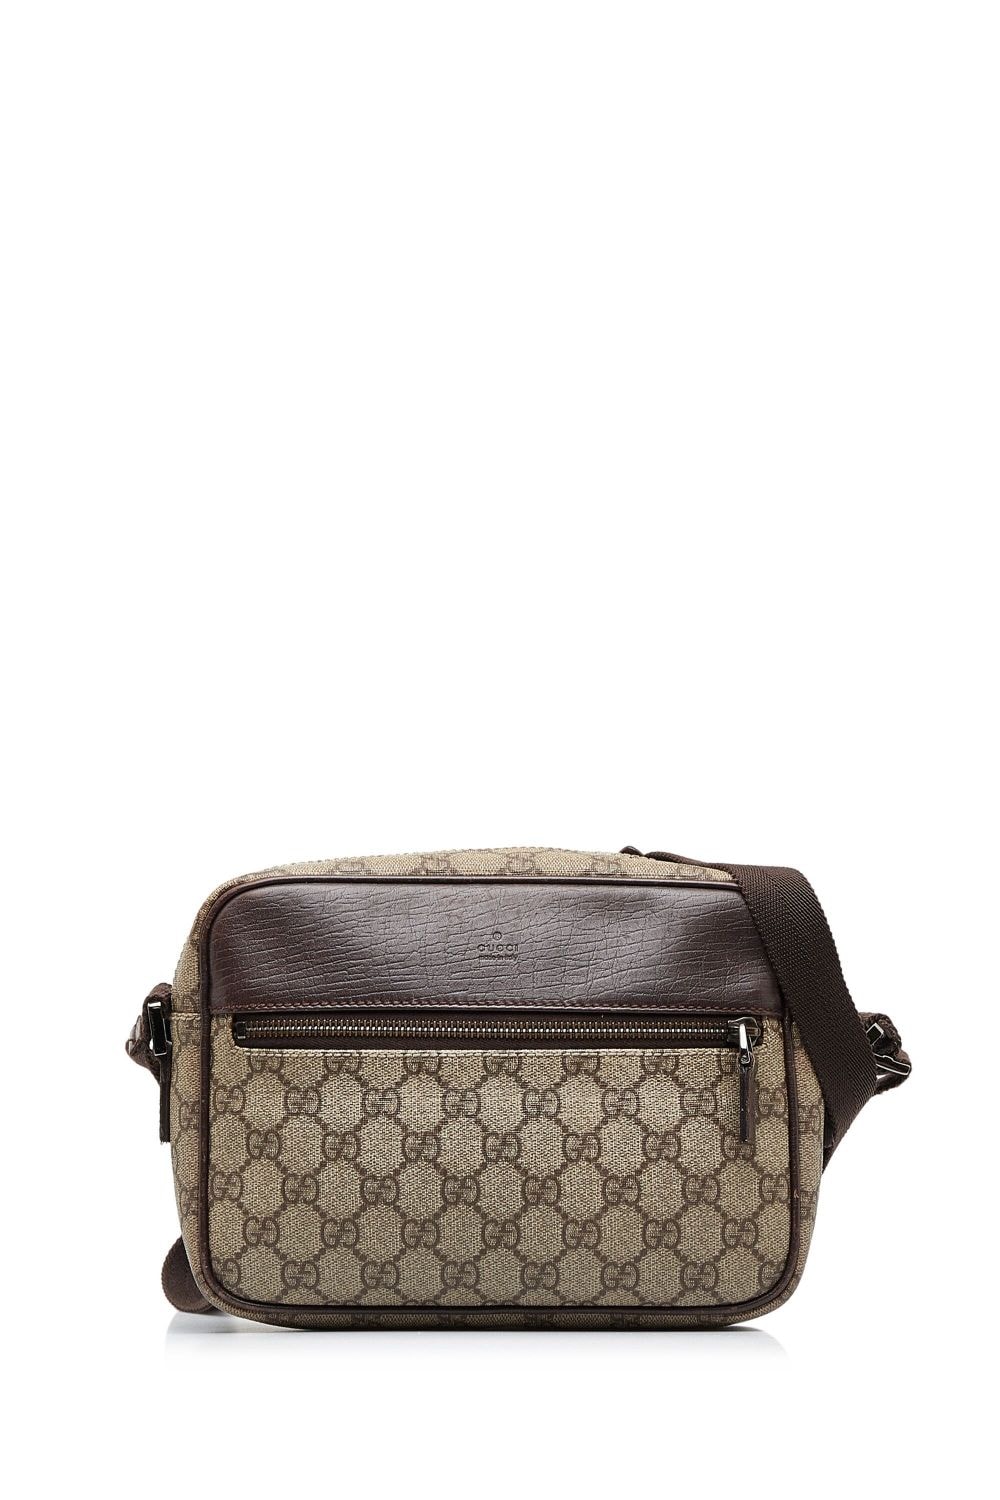 Pre-owned Gucci 2000-2015   Gg Supreme Crossbody Bag In Brown